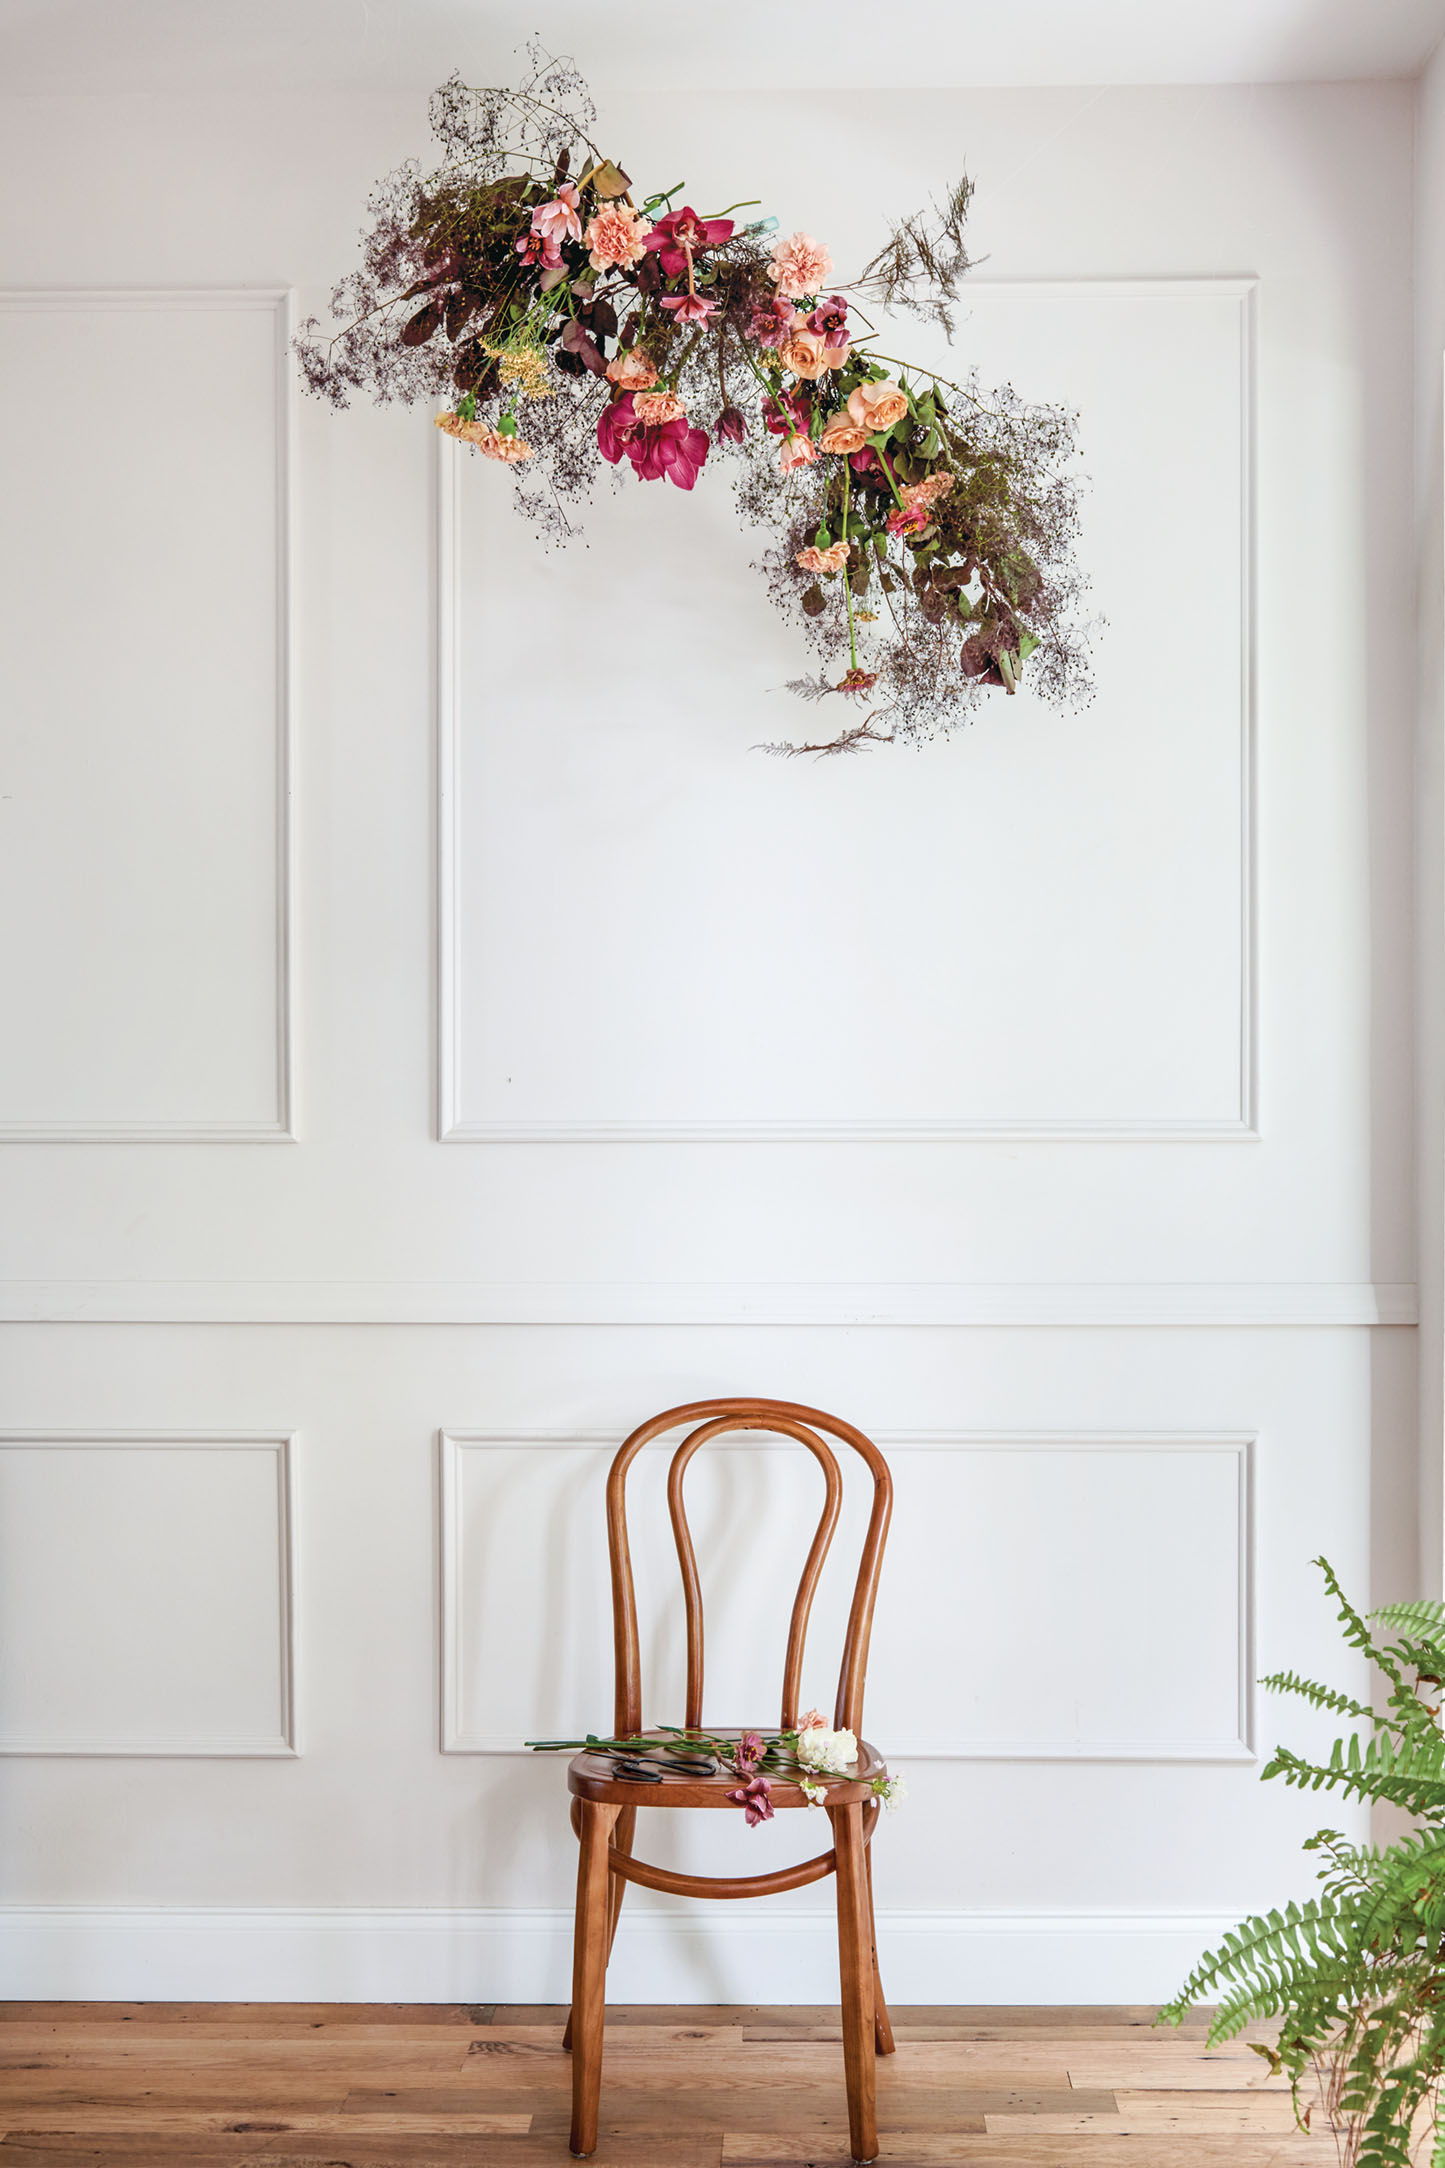 In a sunlight-filled, elegant white room, a suspended floral arrangement by Monica Delgado hangs above a simple wooden chair